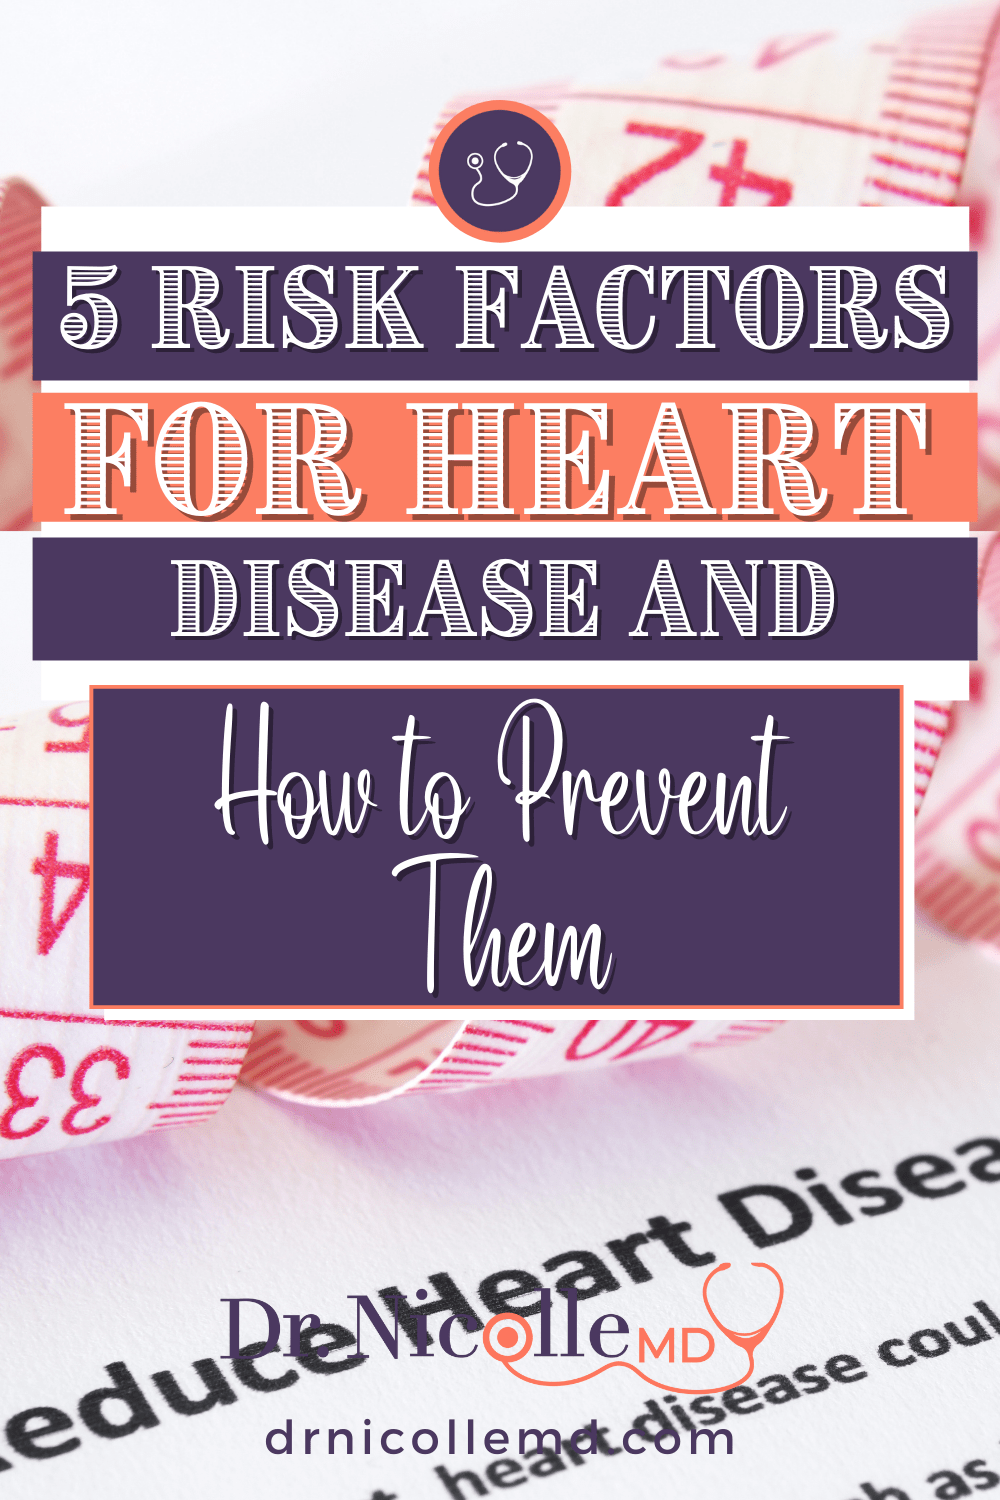 5 Risk Factors for Heart Disease and How to Prevent Them